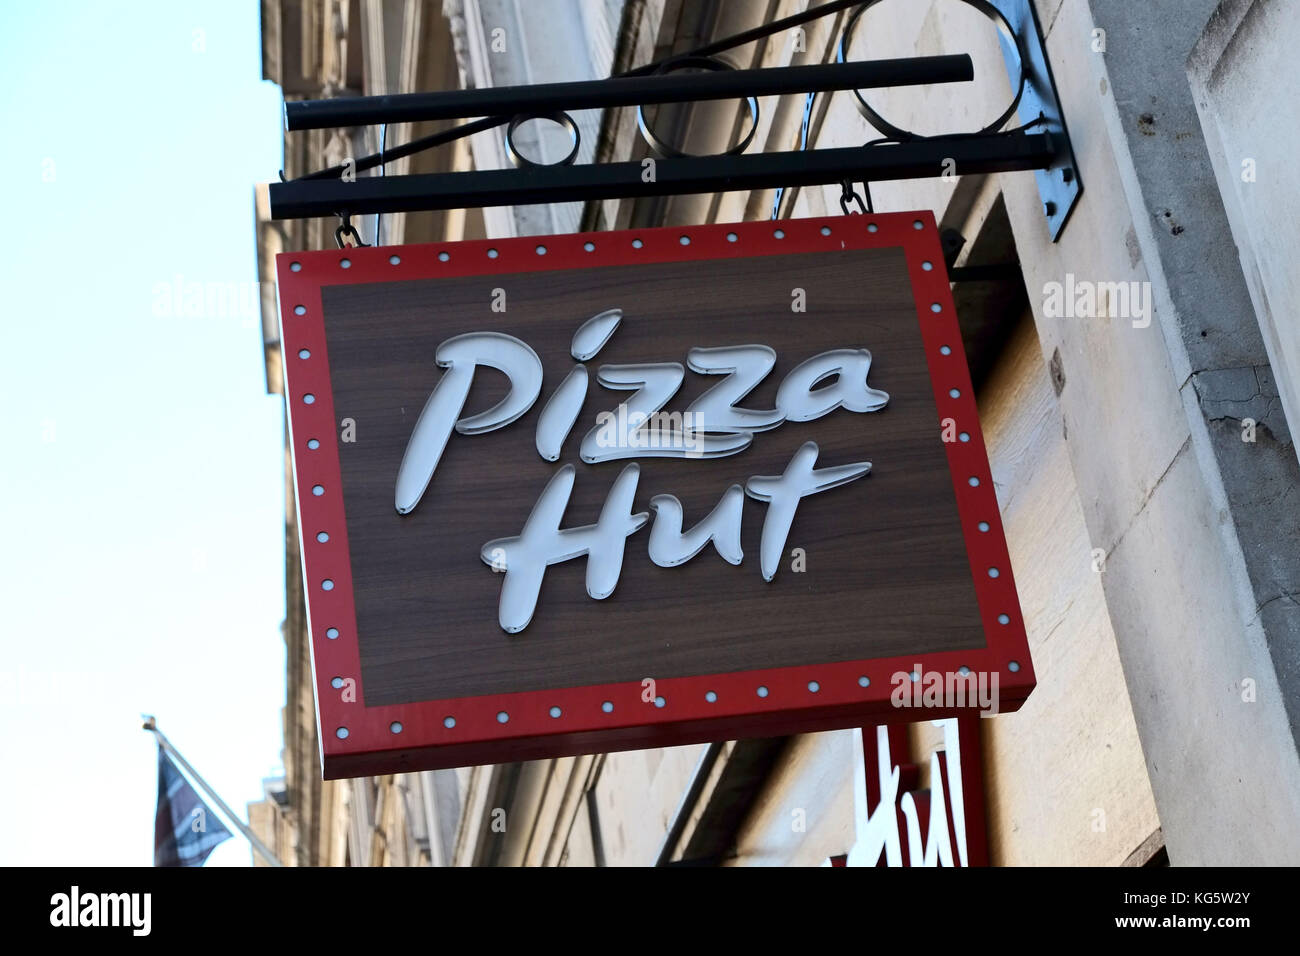 Pizza Hut is an American restaurant chain and international franchise founded in 1958 by Dan and Frank Carney. Stock Photo